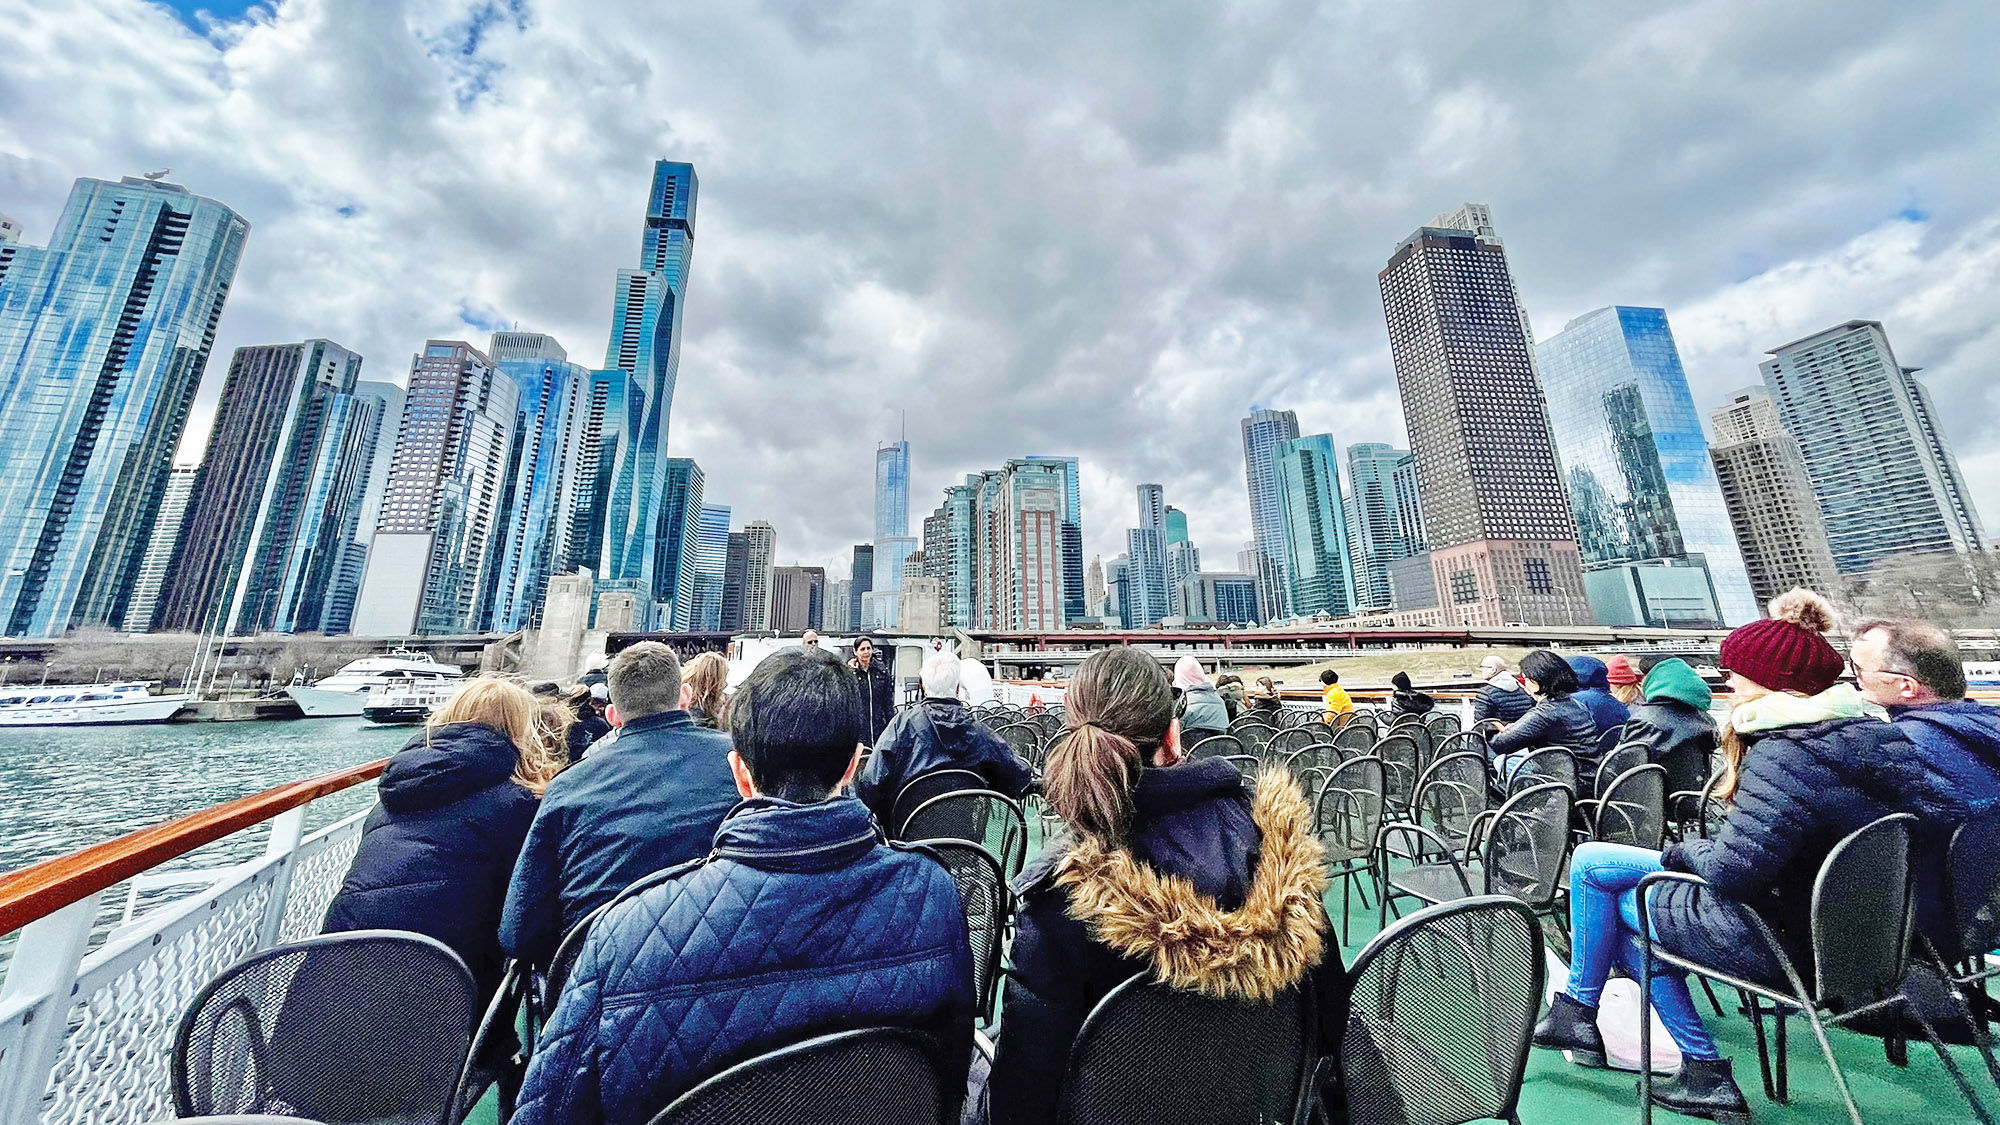 Guests take in the Chicago skyline from one of First Lady Cruises' ships.